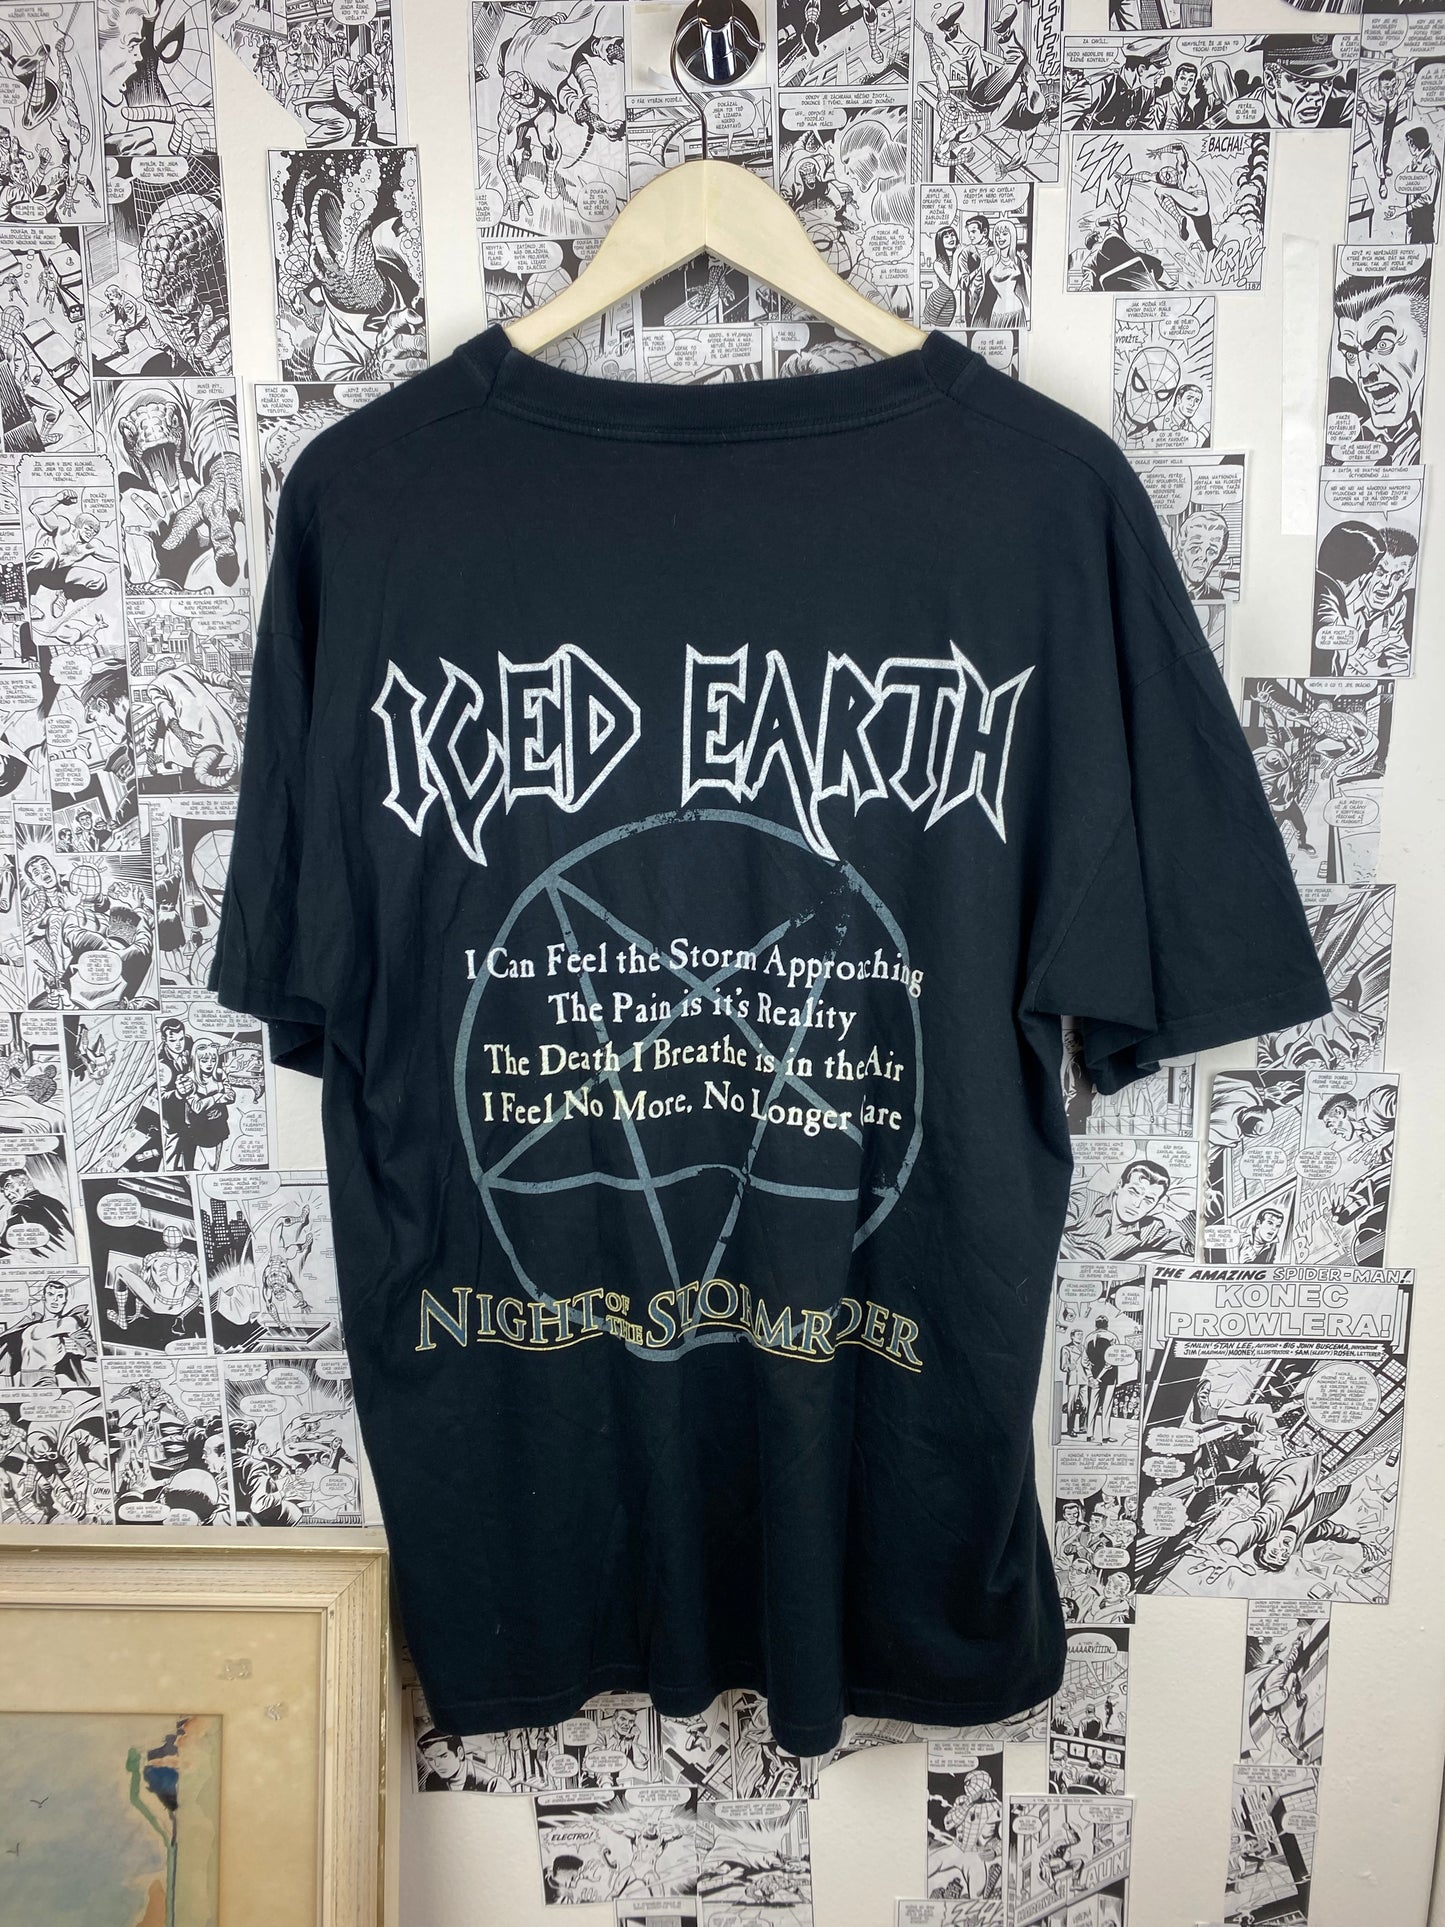 Vintage Iced Earth “Night of the Stormrider” t-shirt - size XL